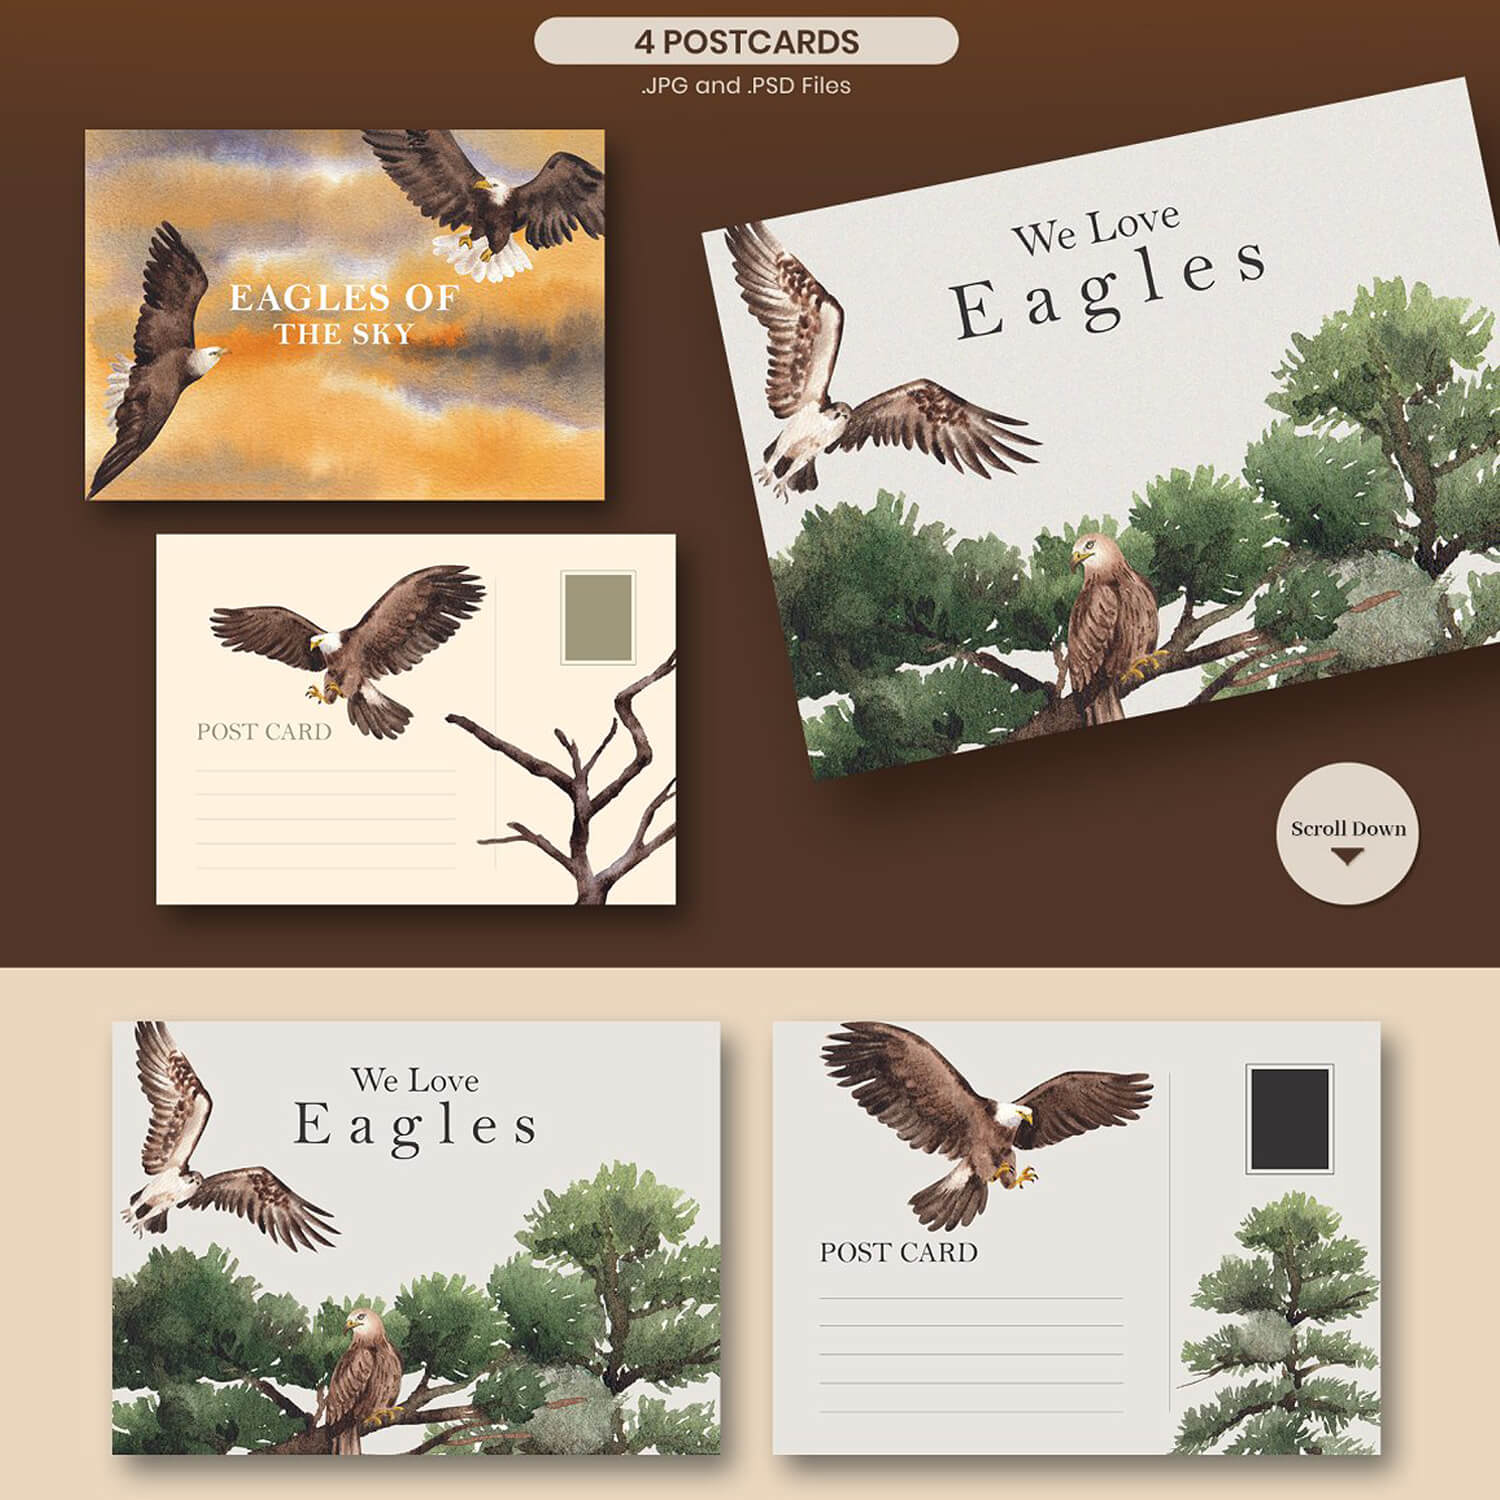 4 postcards with watercolor images of eagles.